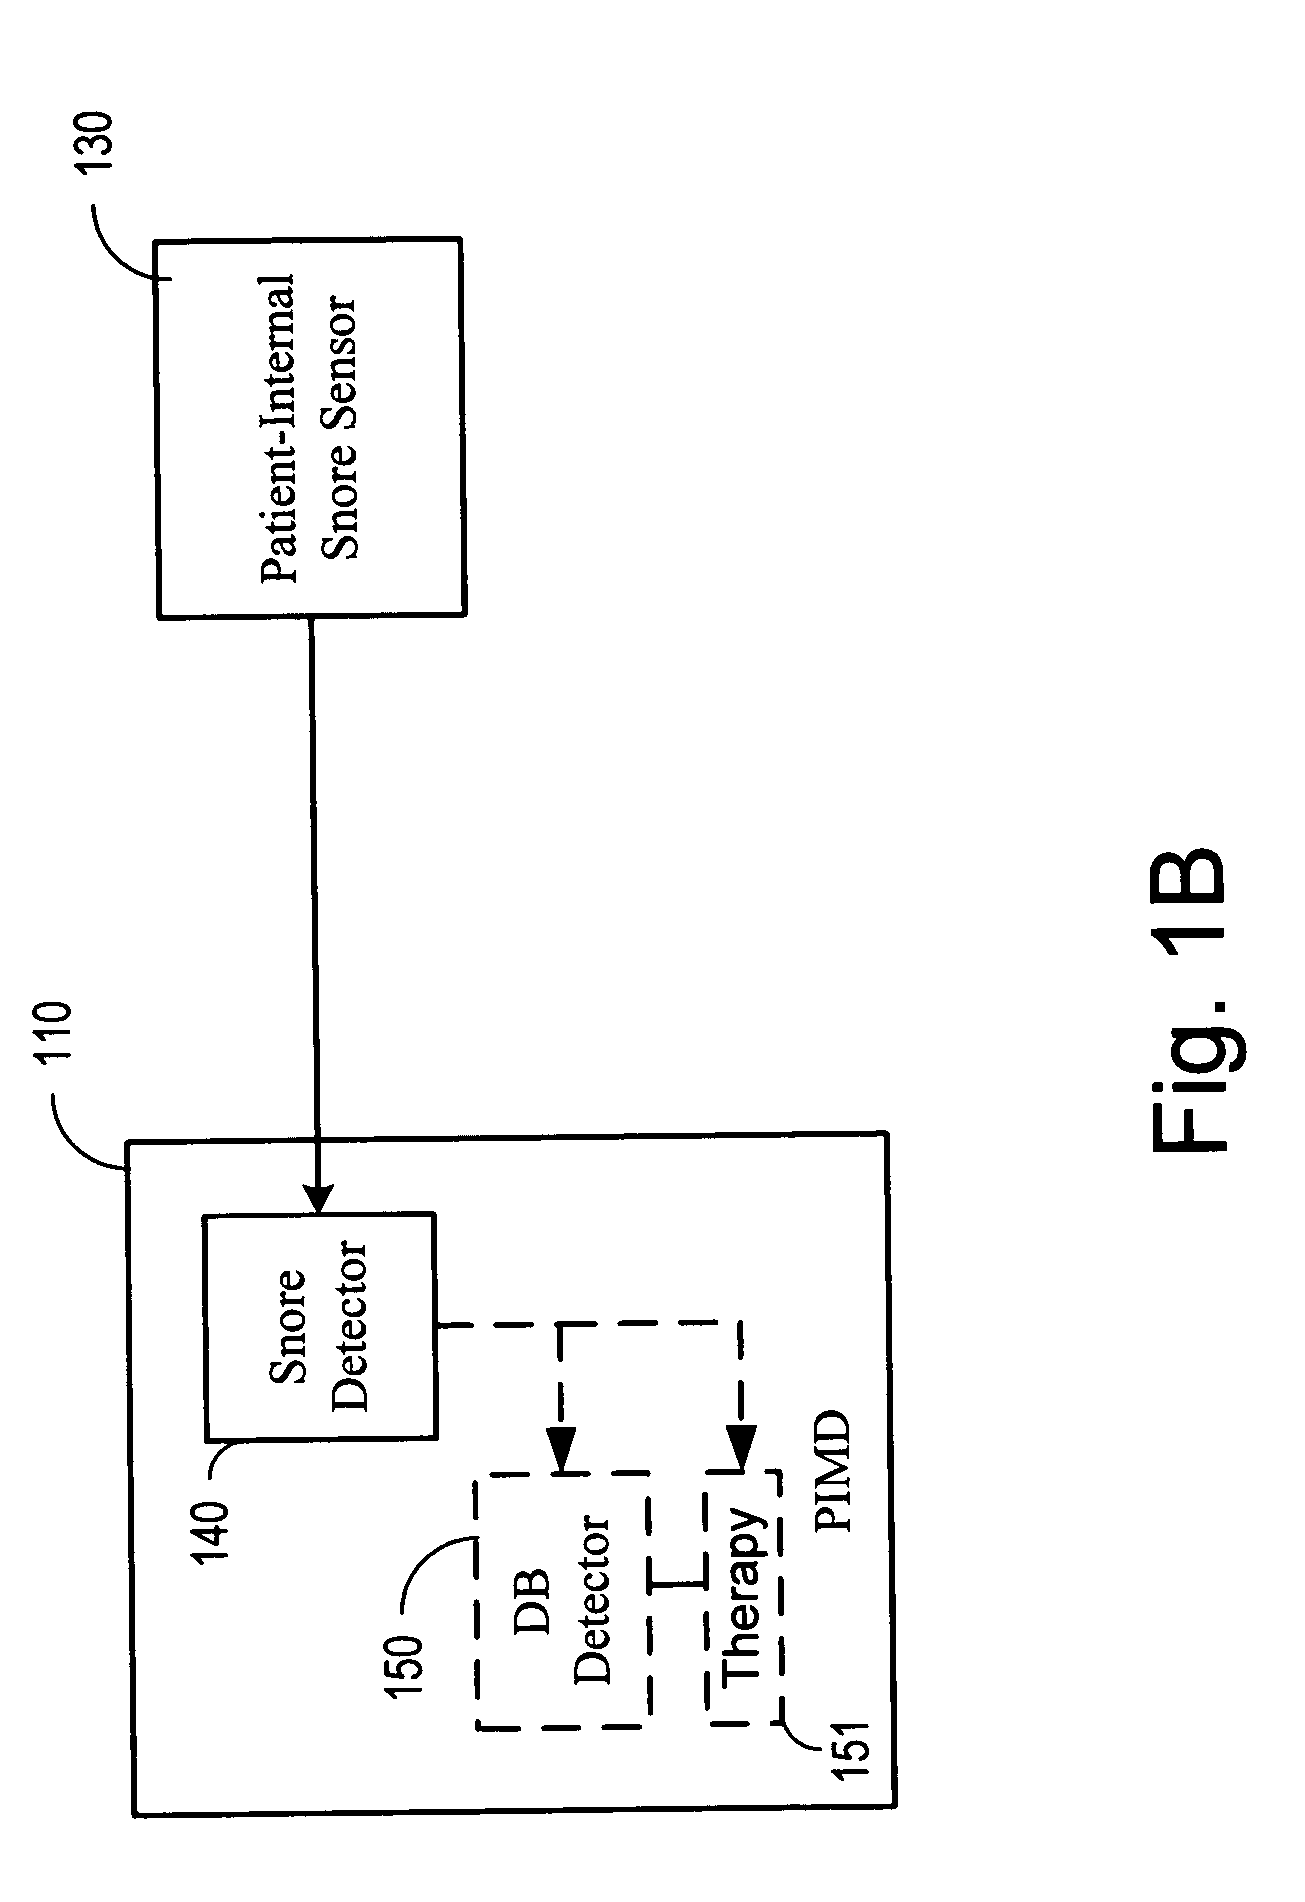 Snoring detection system and method